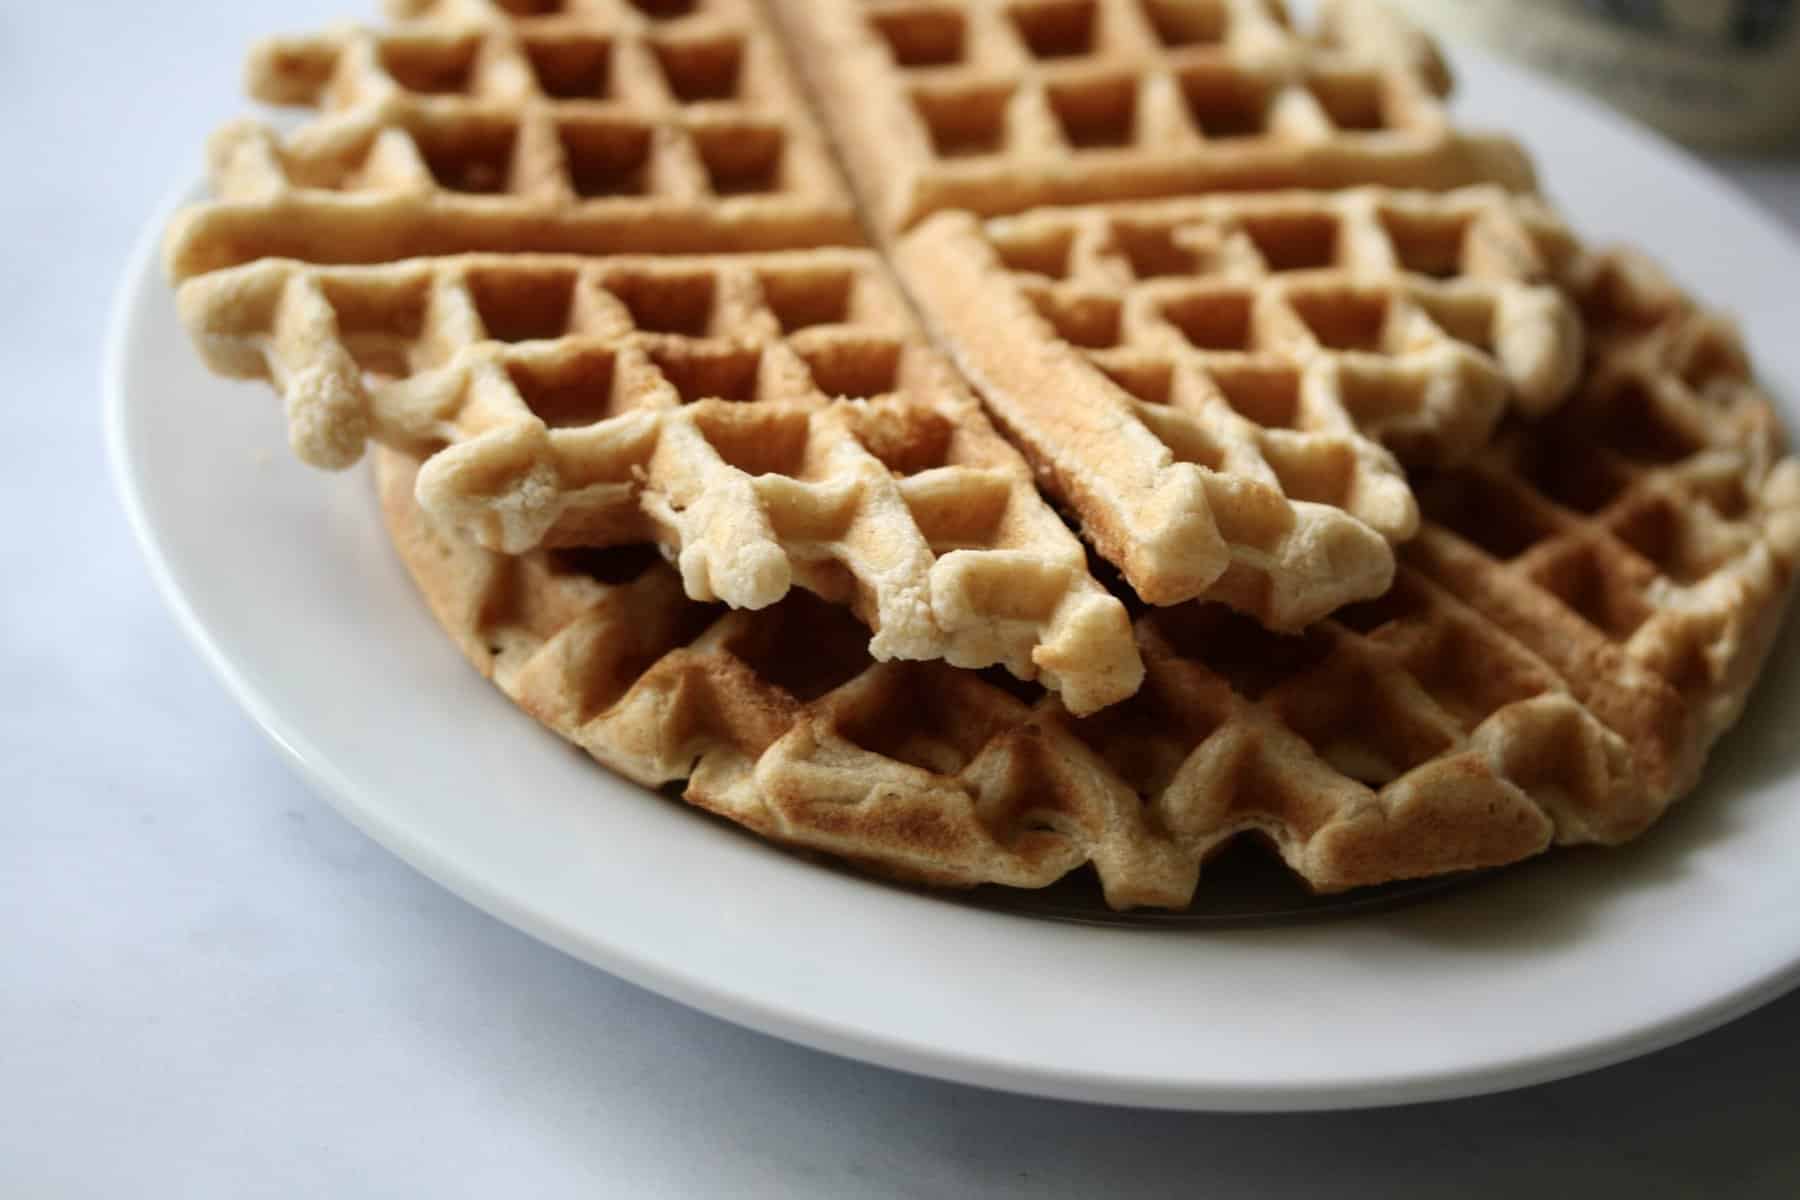 A stack of whole grain waffles on a white plate.